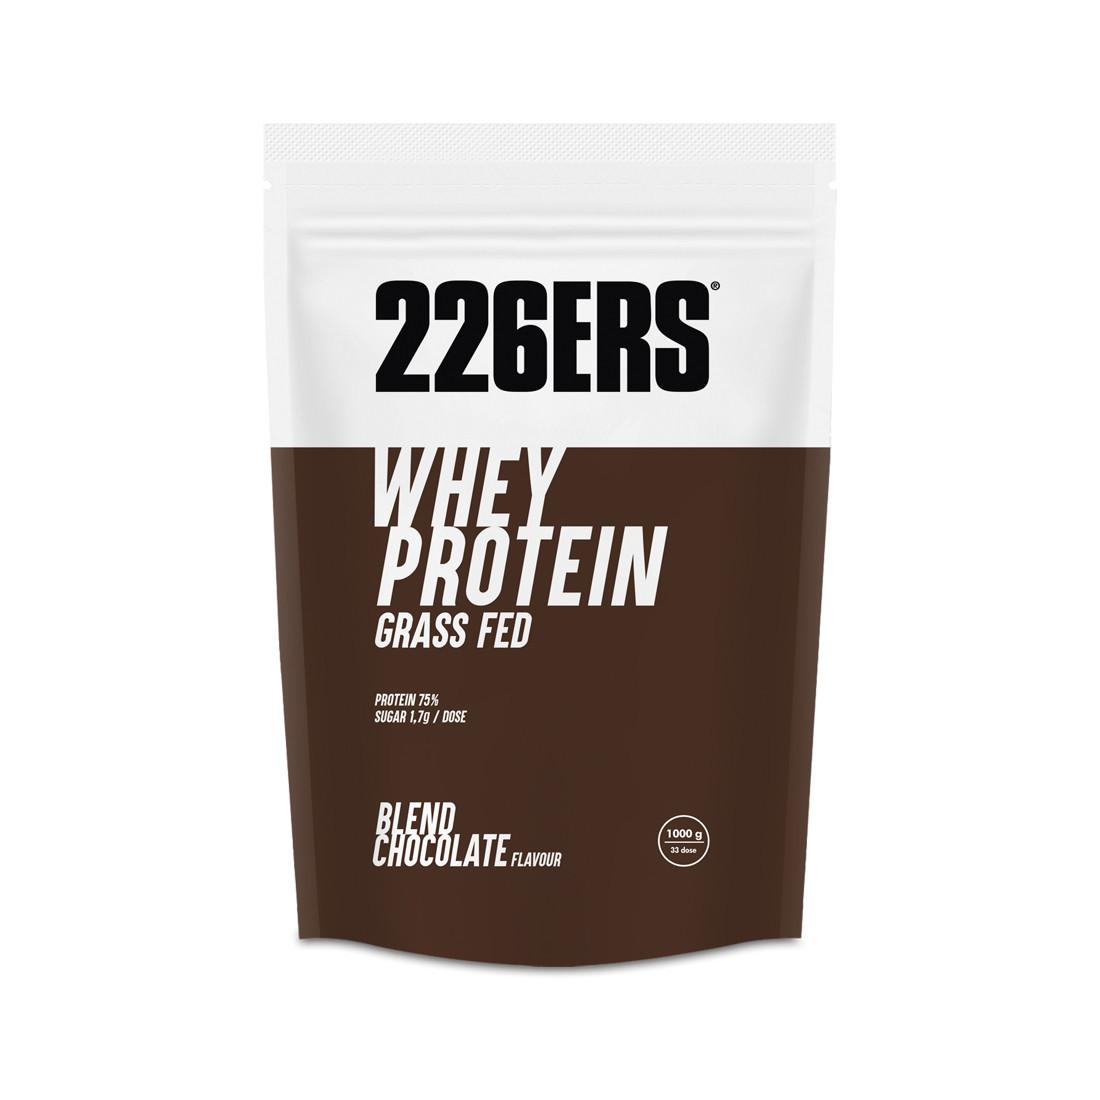 WHEY PROTEIN - Grass Fed Protein...